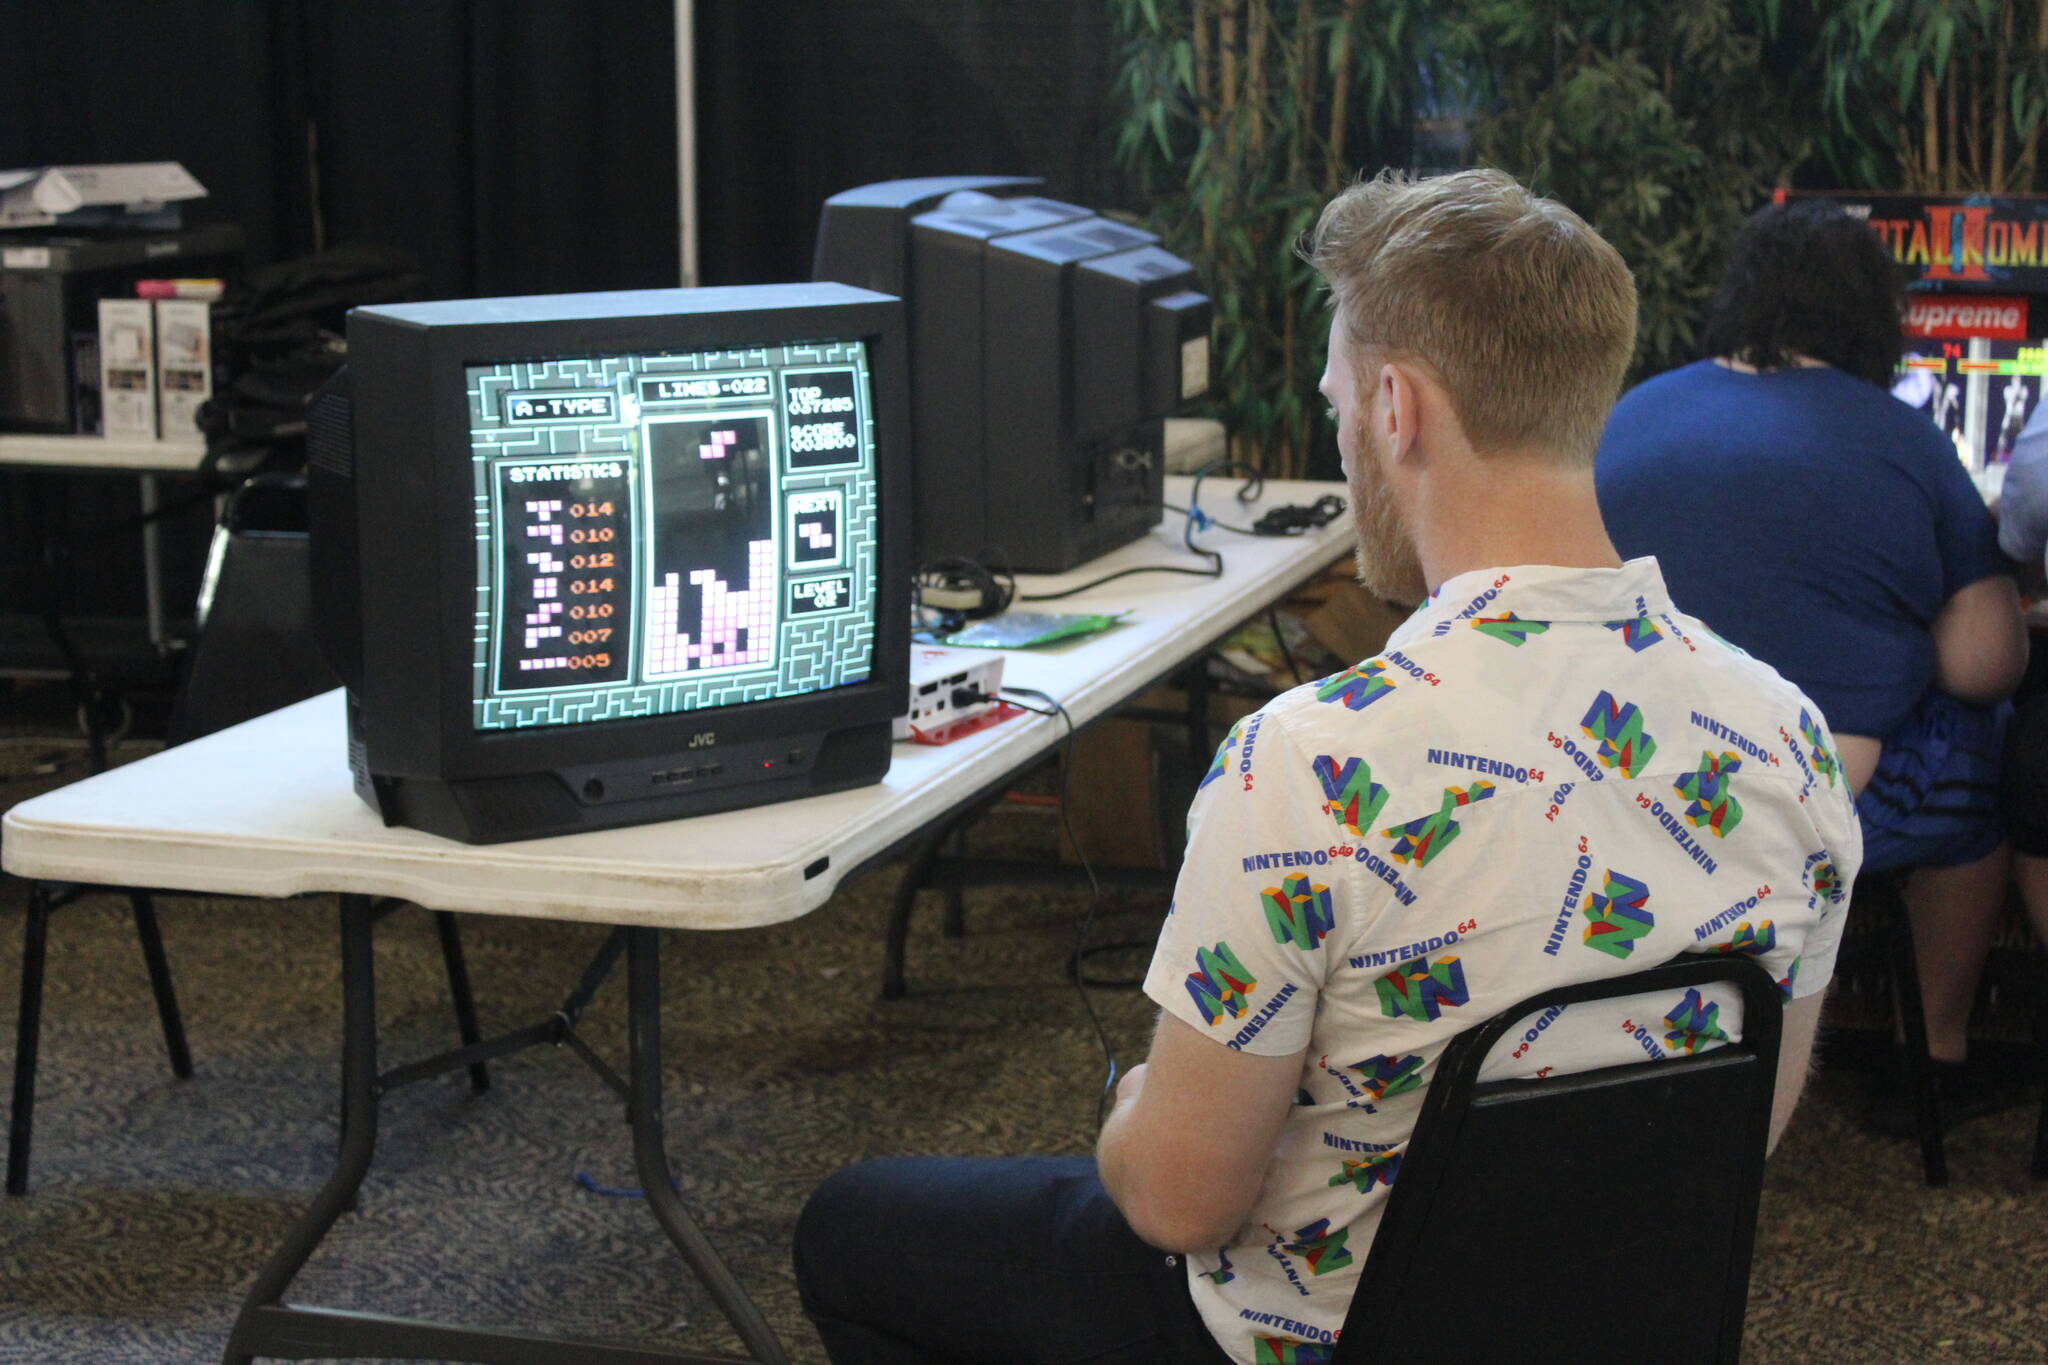 Guests at the convention could play retro video games like Tetris. Photo by Bailey Jo Josie/Sound Publishing.